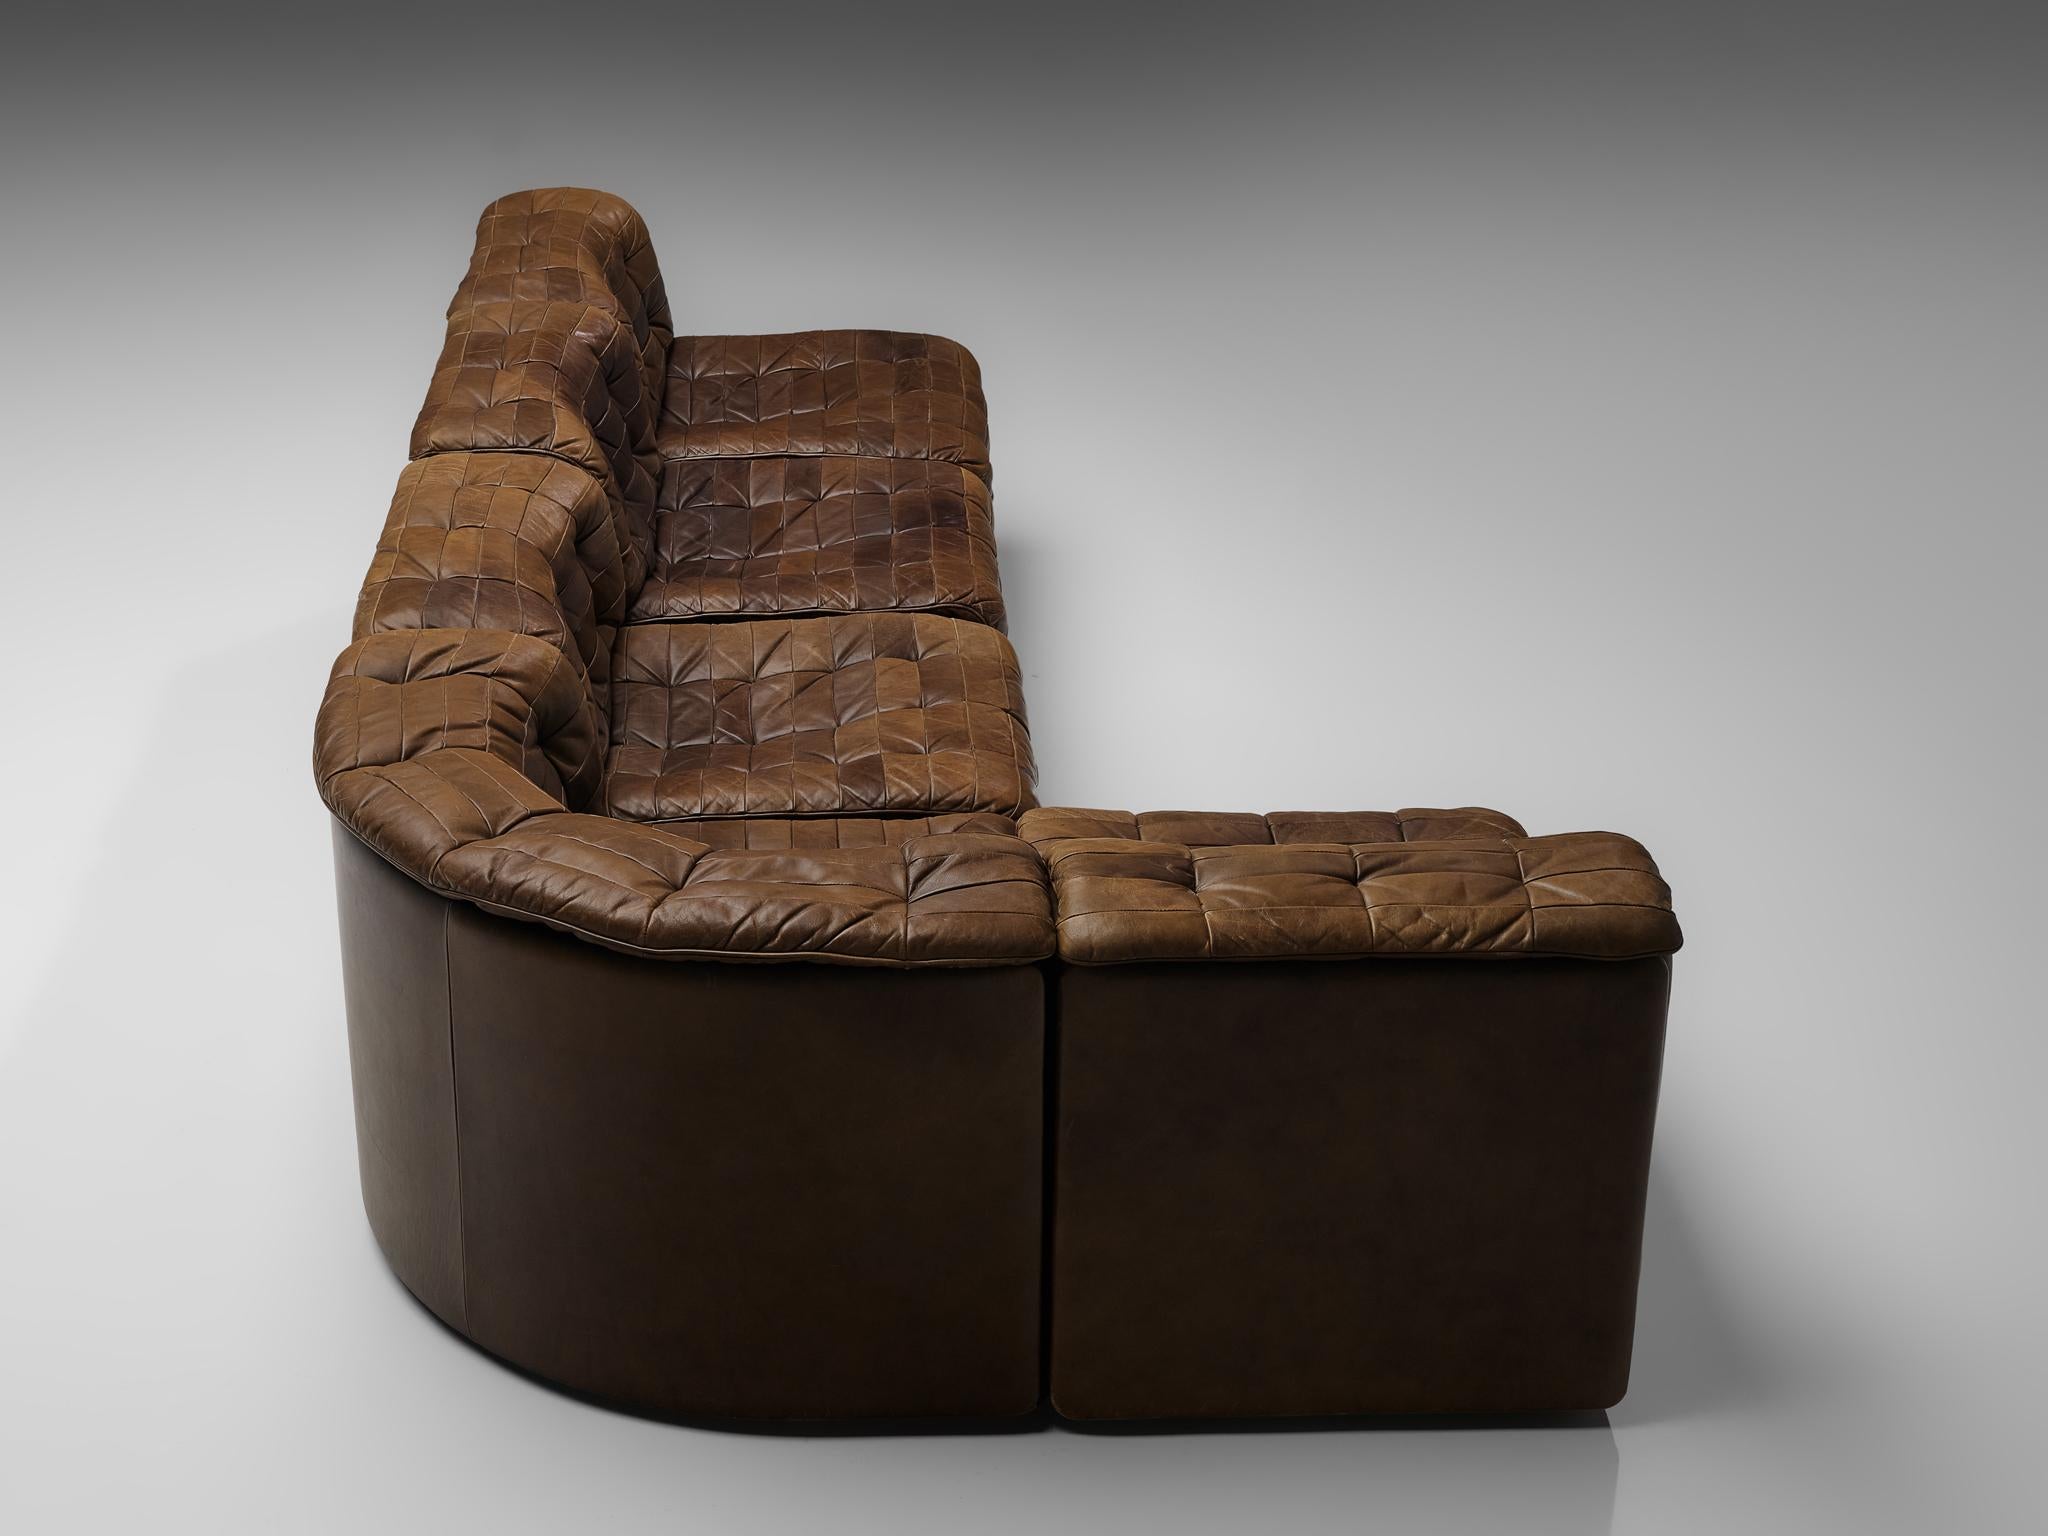 De Sede Sectional Sofa in Tufted Brown Leather 6